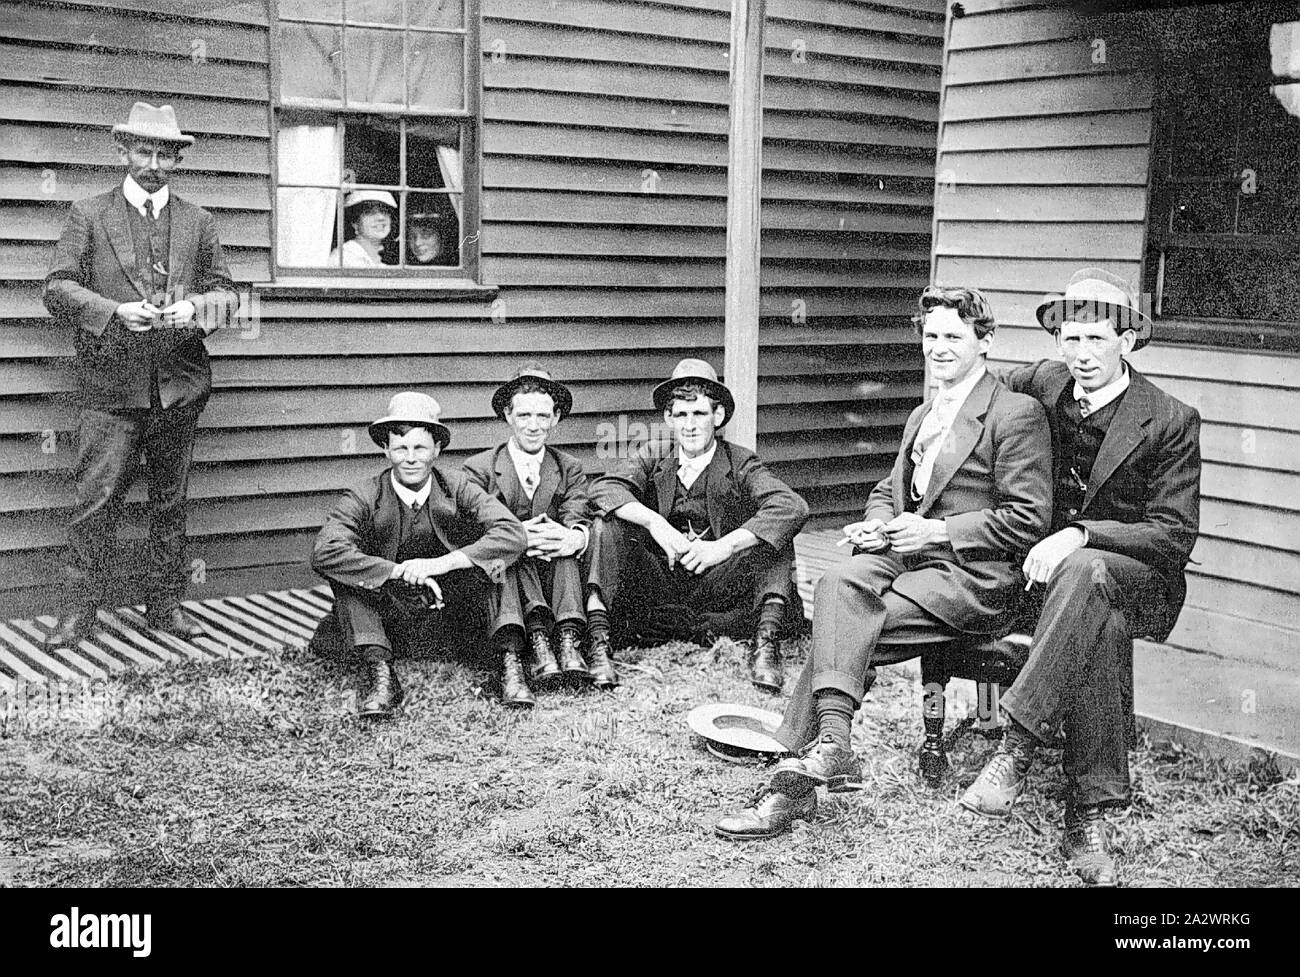 Negative - Strathdownie, Victoria, 1920, Six men outside the Strathdownie Hotel. Two women peer through the window Stock Photo